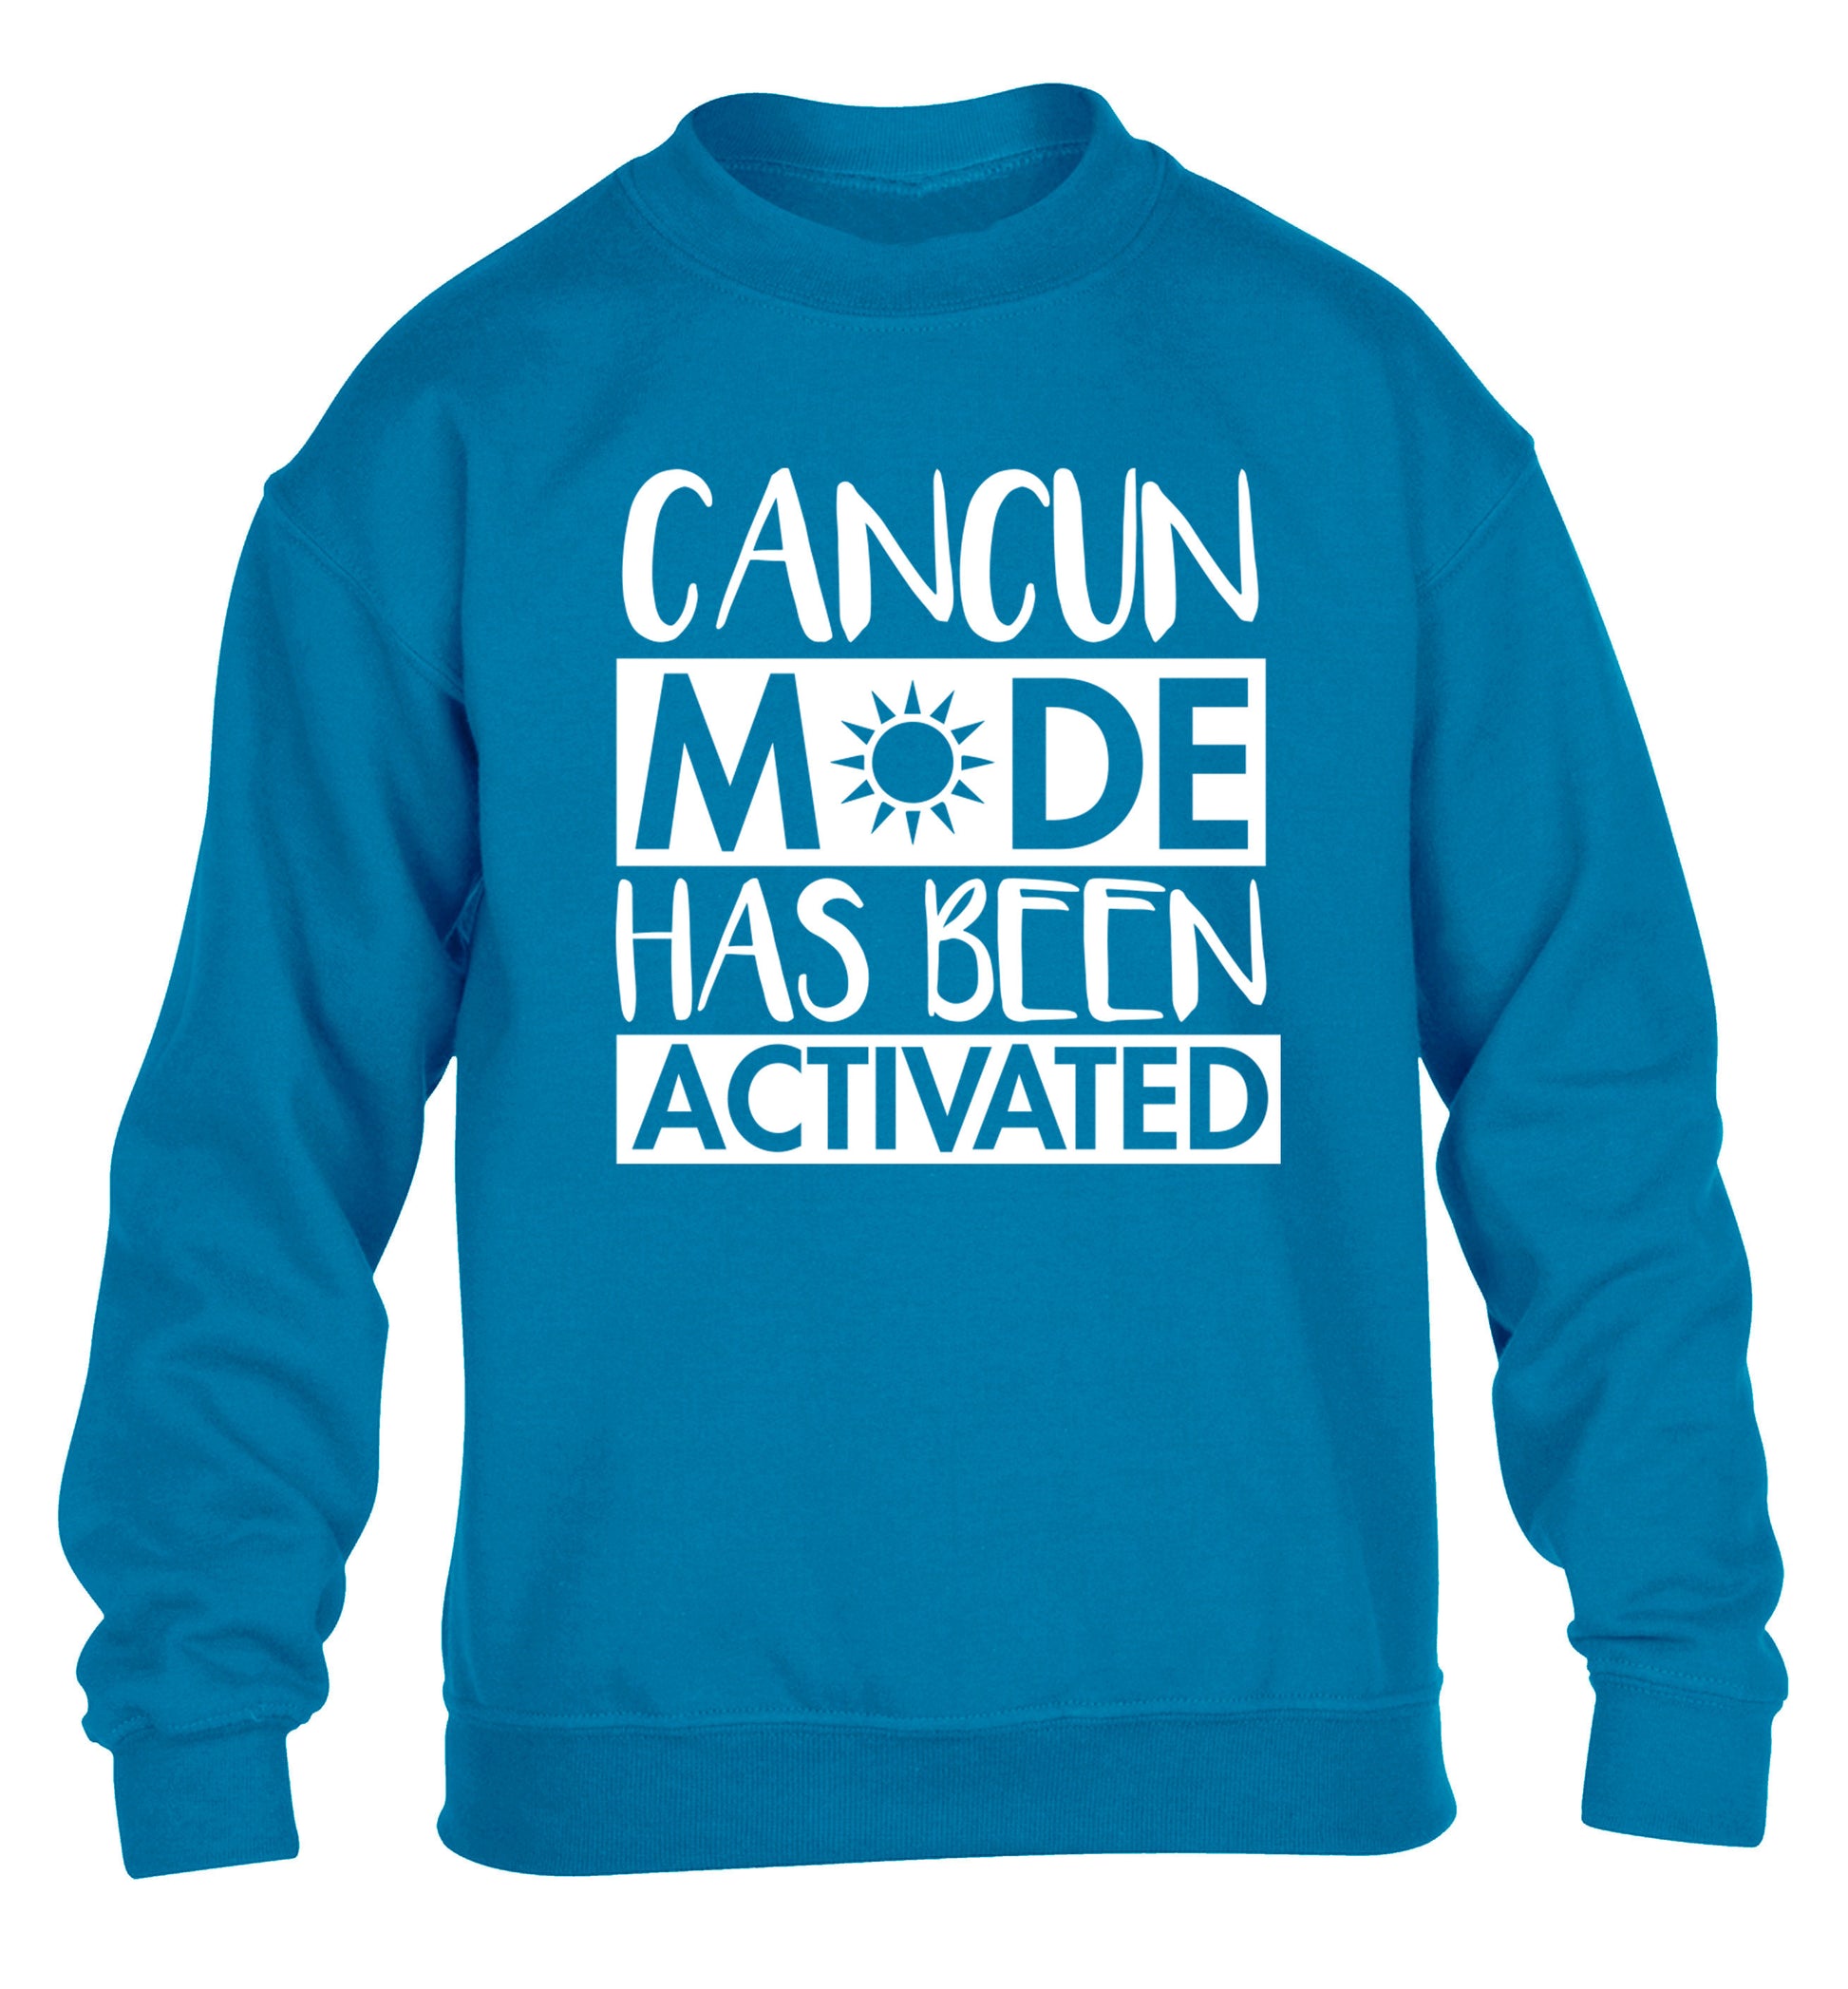 Cancun mode has been activated children's blue sweater 12-14 Years